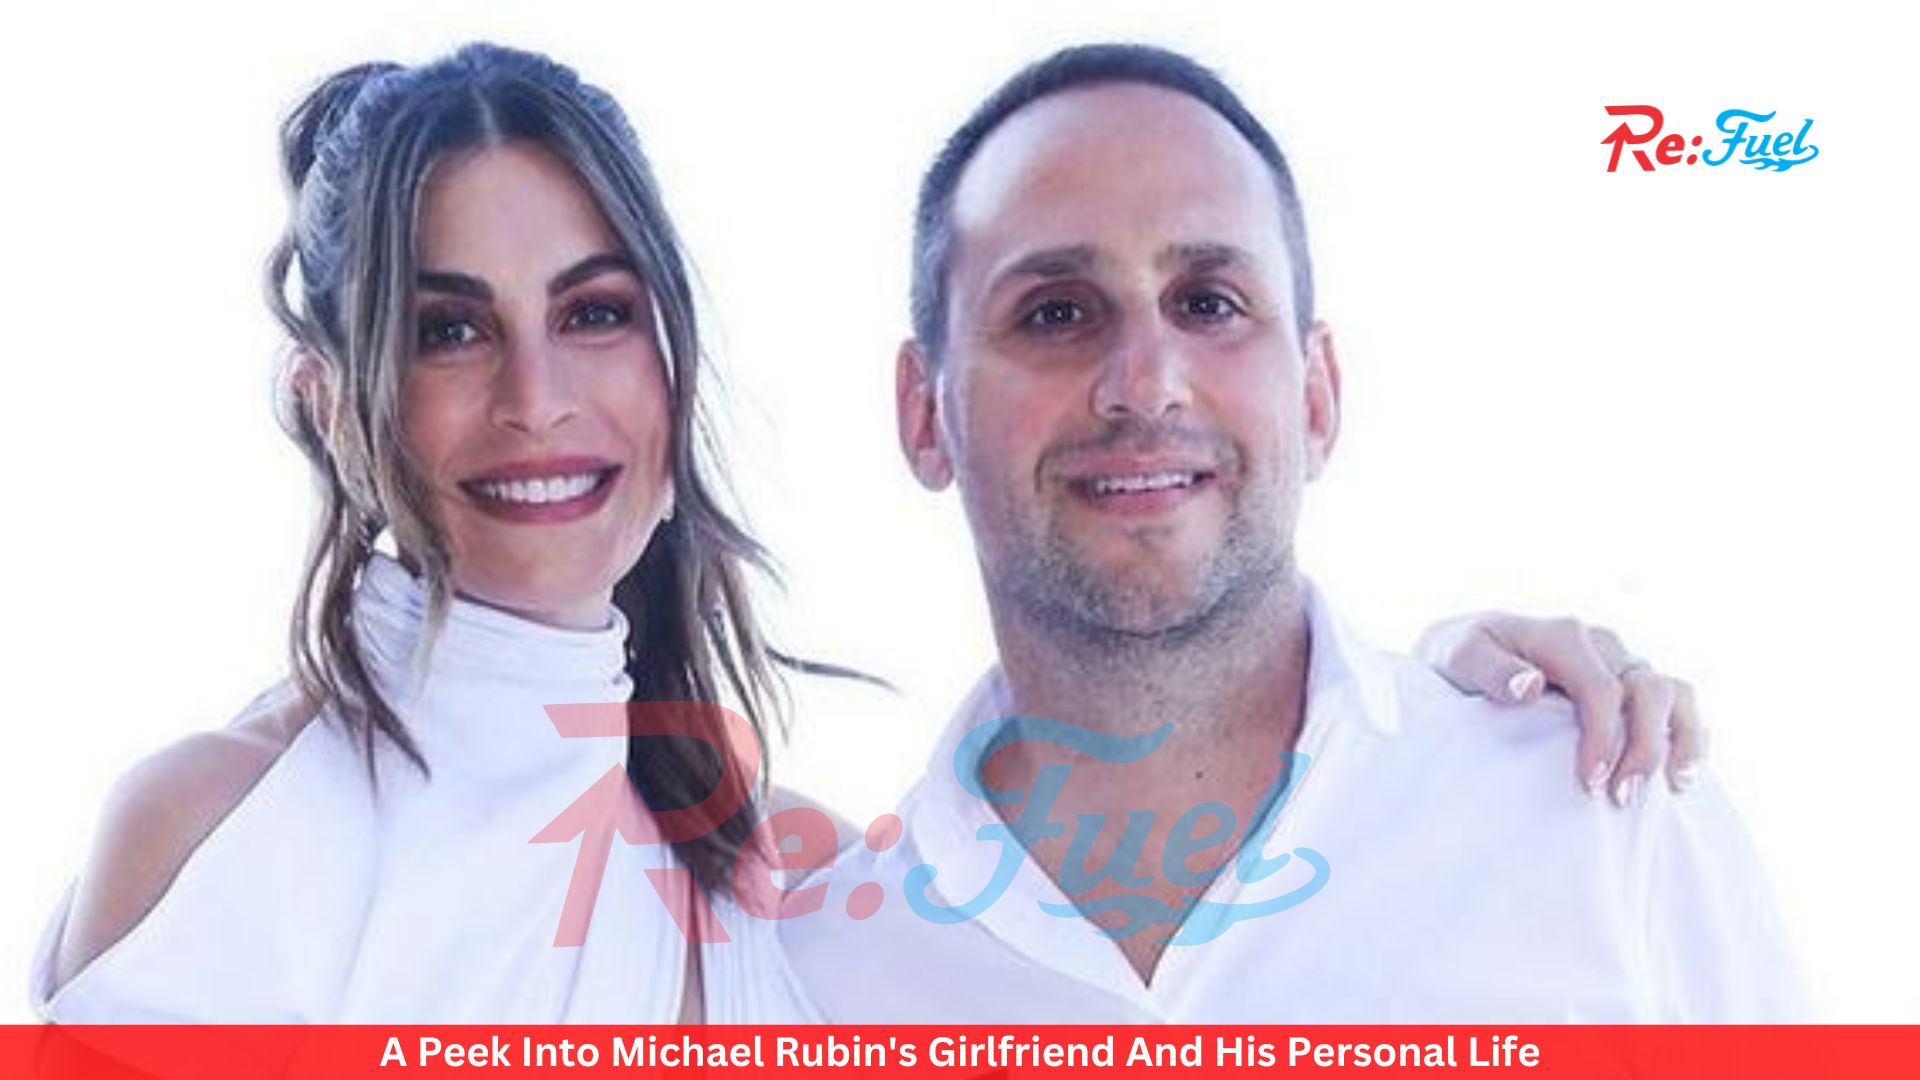 A Peek Into Michael Rubin's Girlfriend And His Personal Life